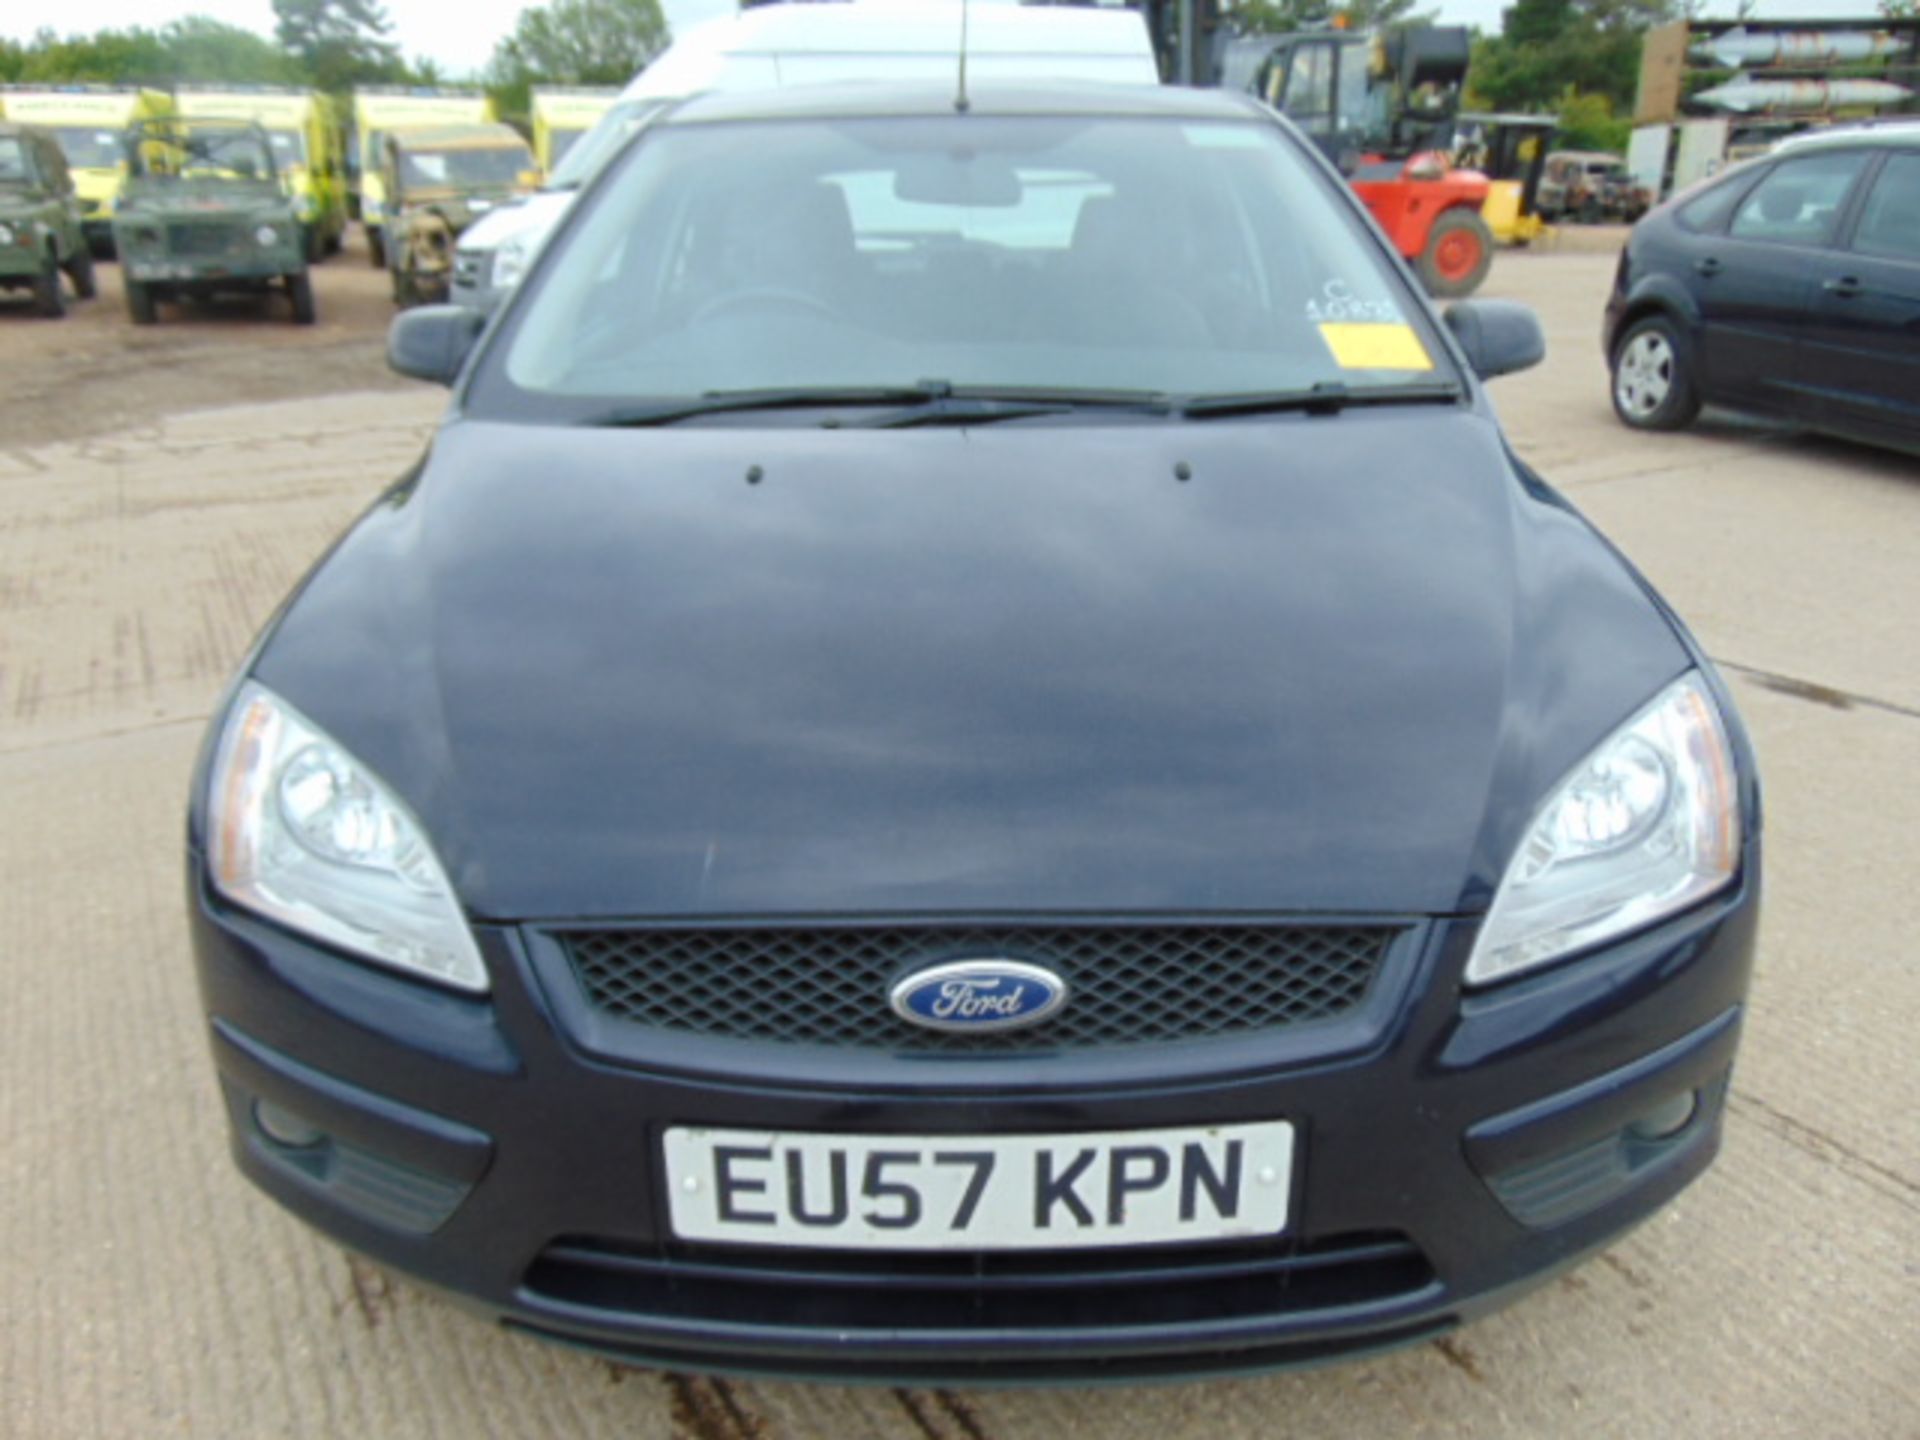 2008 Ford Focus 1.8 TDCI Style Hatchback - Image 2 of 18